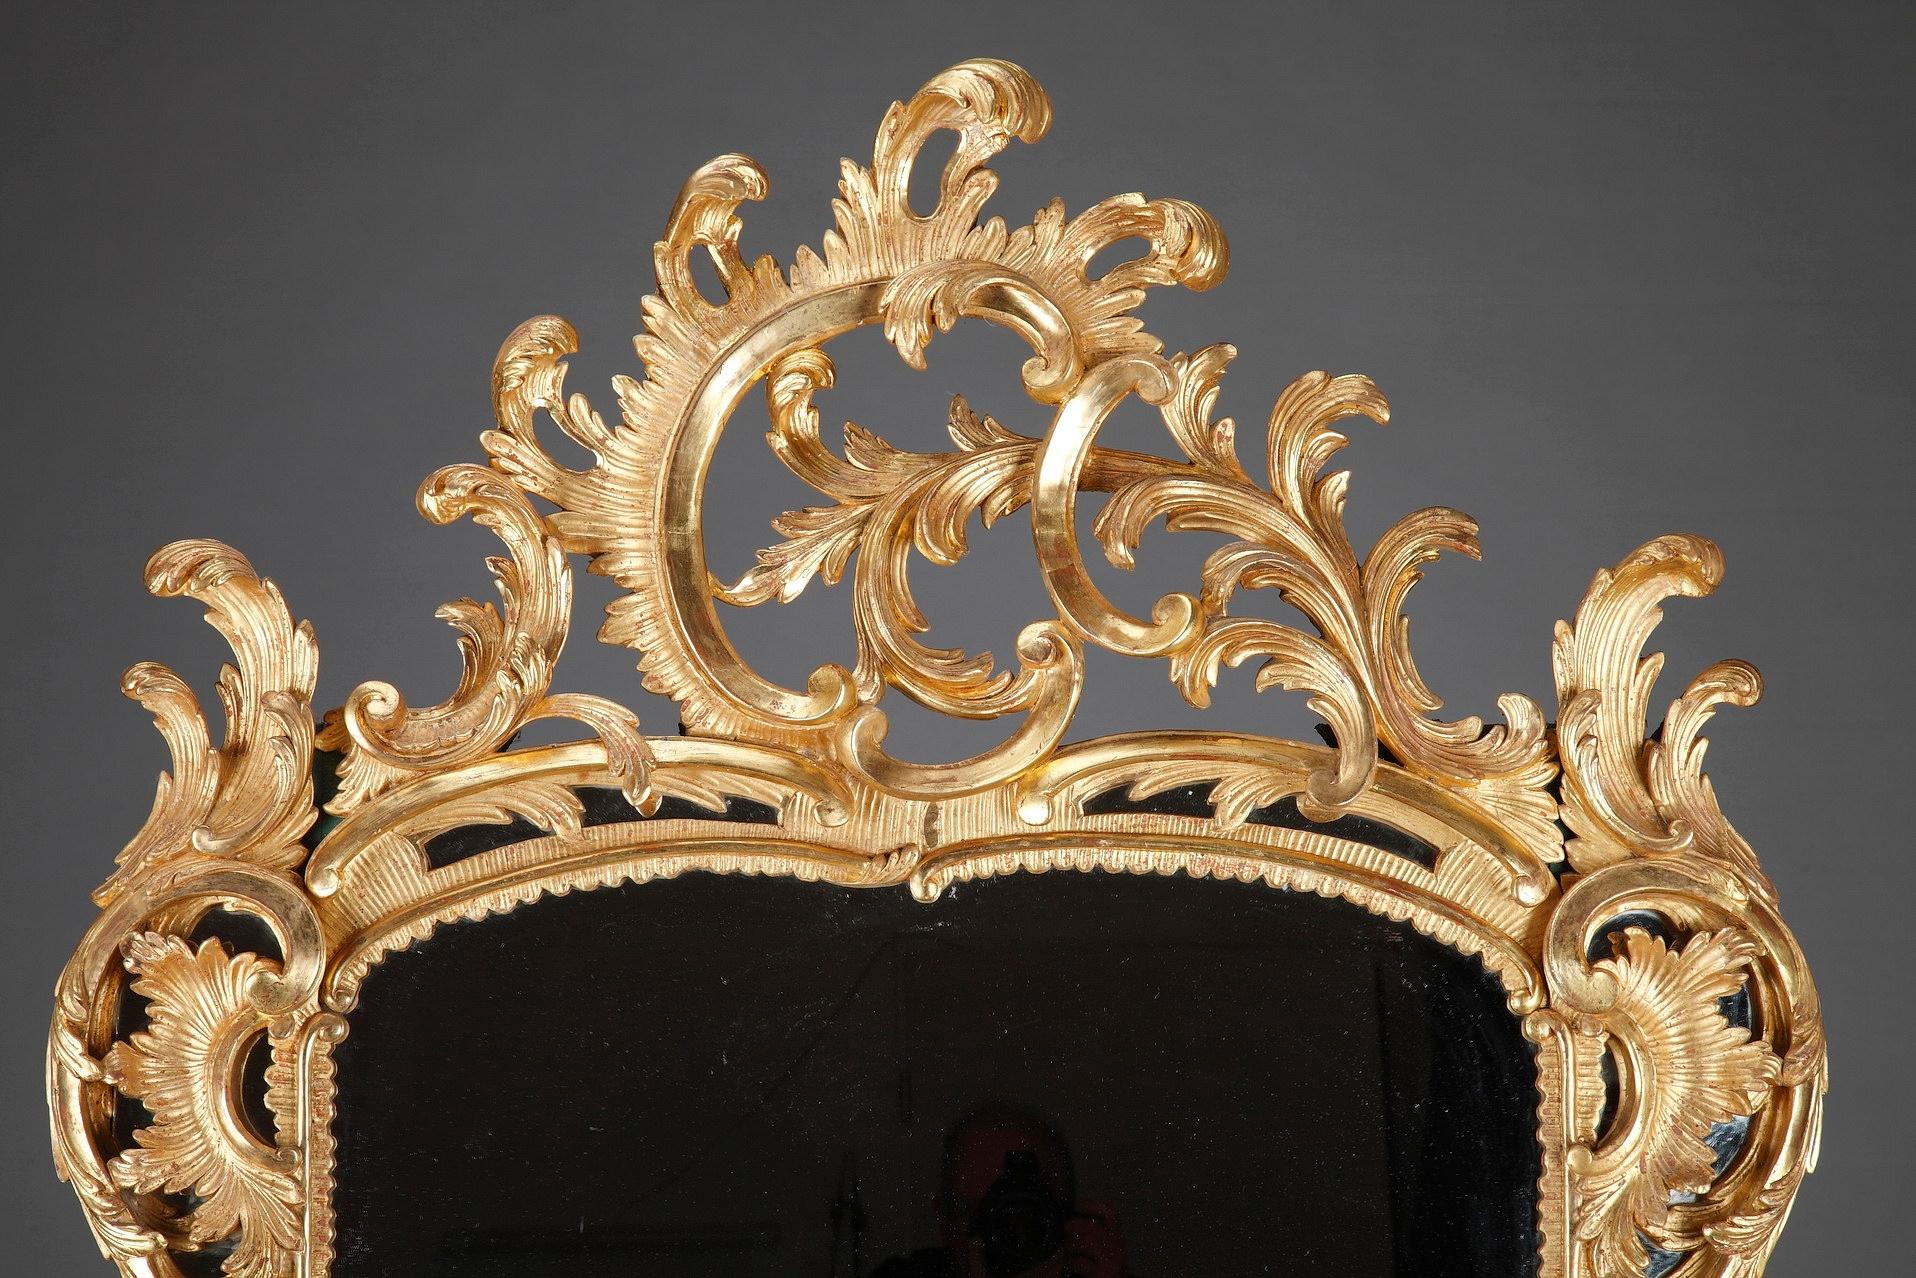 Monumental mirror crafted in the opulent Baroque style. The mirror features an ondulating, intricately carved giltwood frame, richly decorated with acanthus leaves, asymmetrical scrolling foliage and rocaille accents. Napoleon III period.

circa